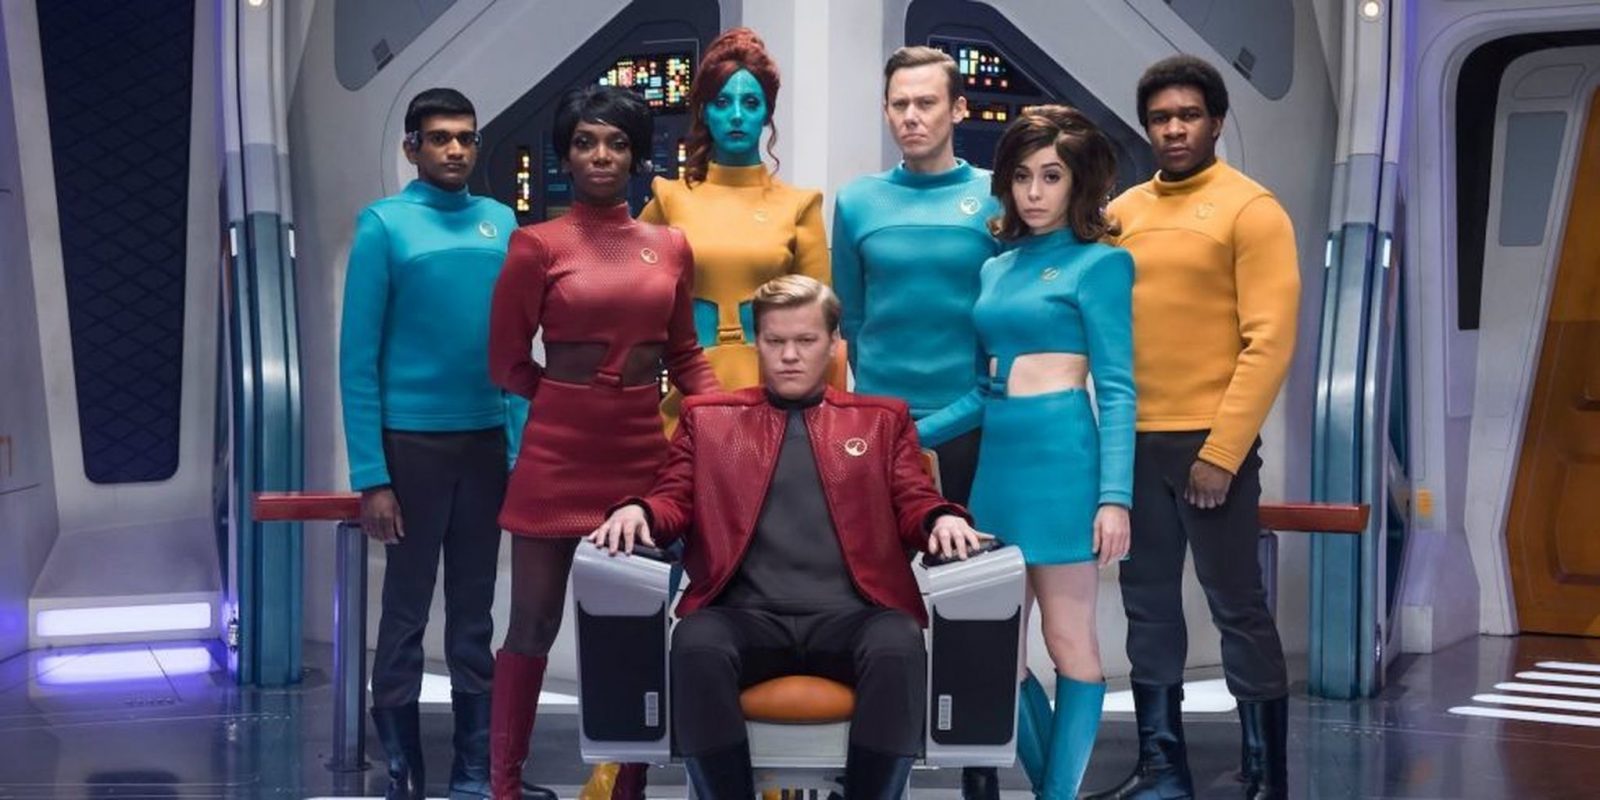 ‘black mirror’ s4 might have been too much of a downer even for us